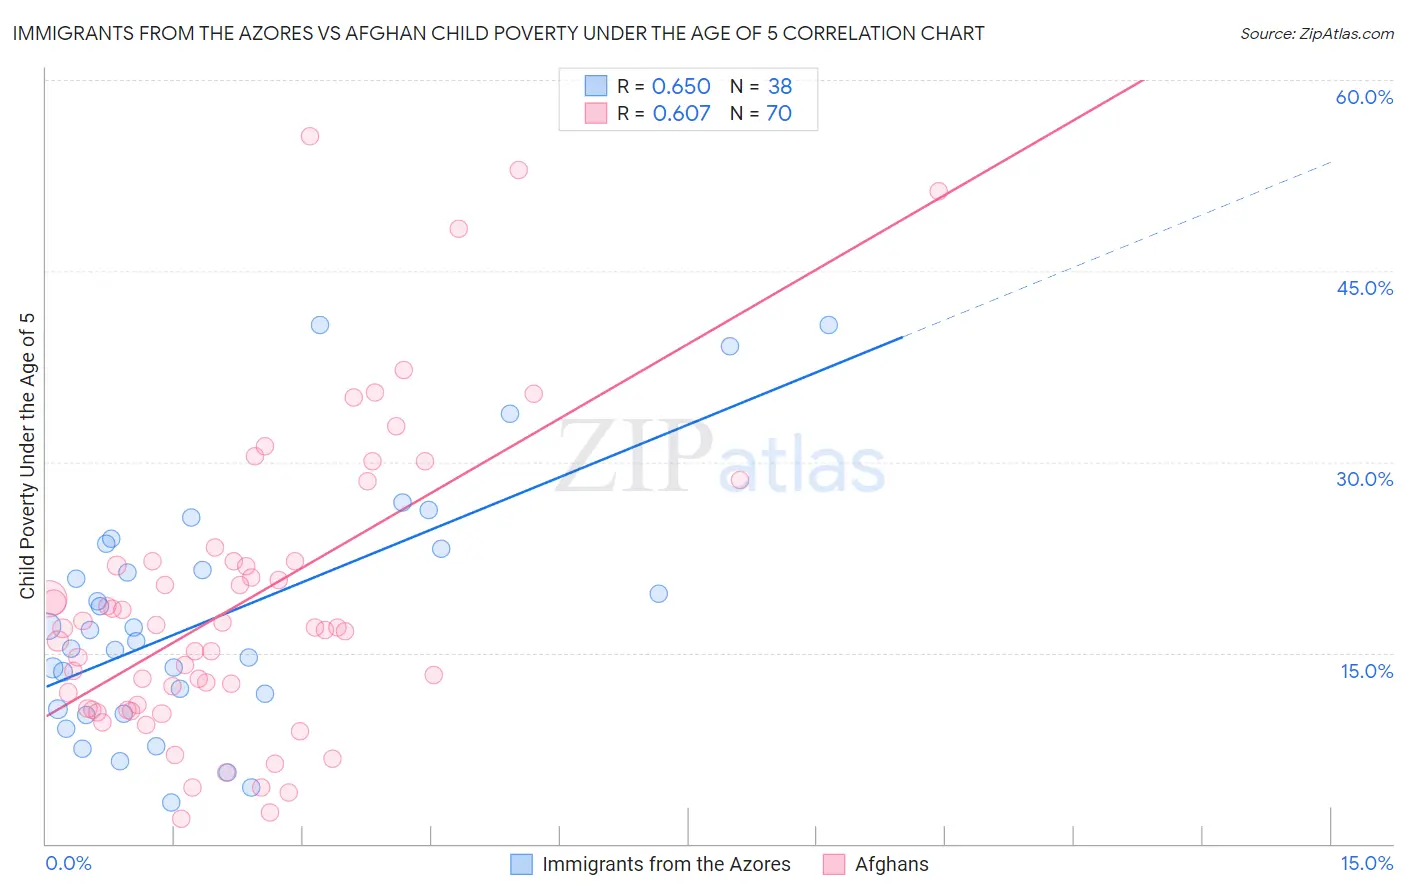 Immigrants from the Azores vs Afghan Child Poverty Under the Age of 5